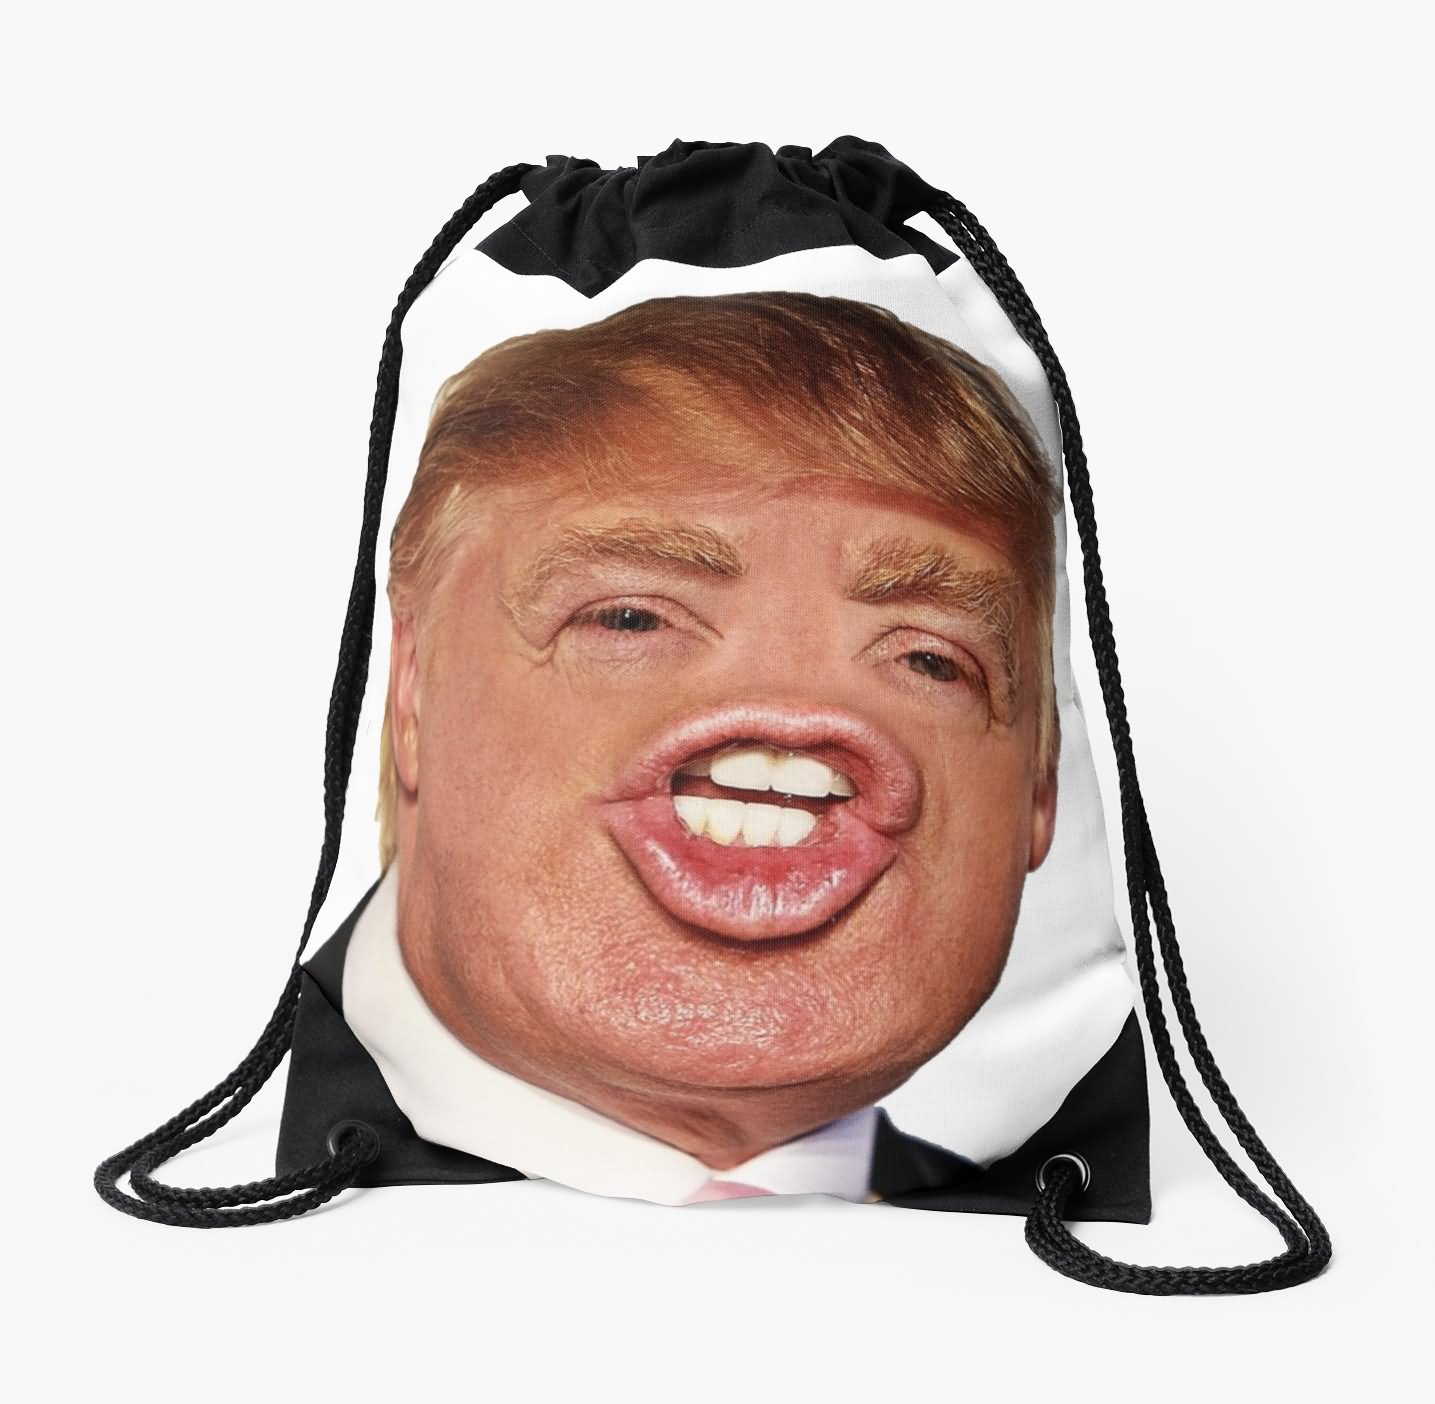 Funny Donald Trump With Pouting Face On Bag Picture